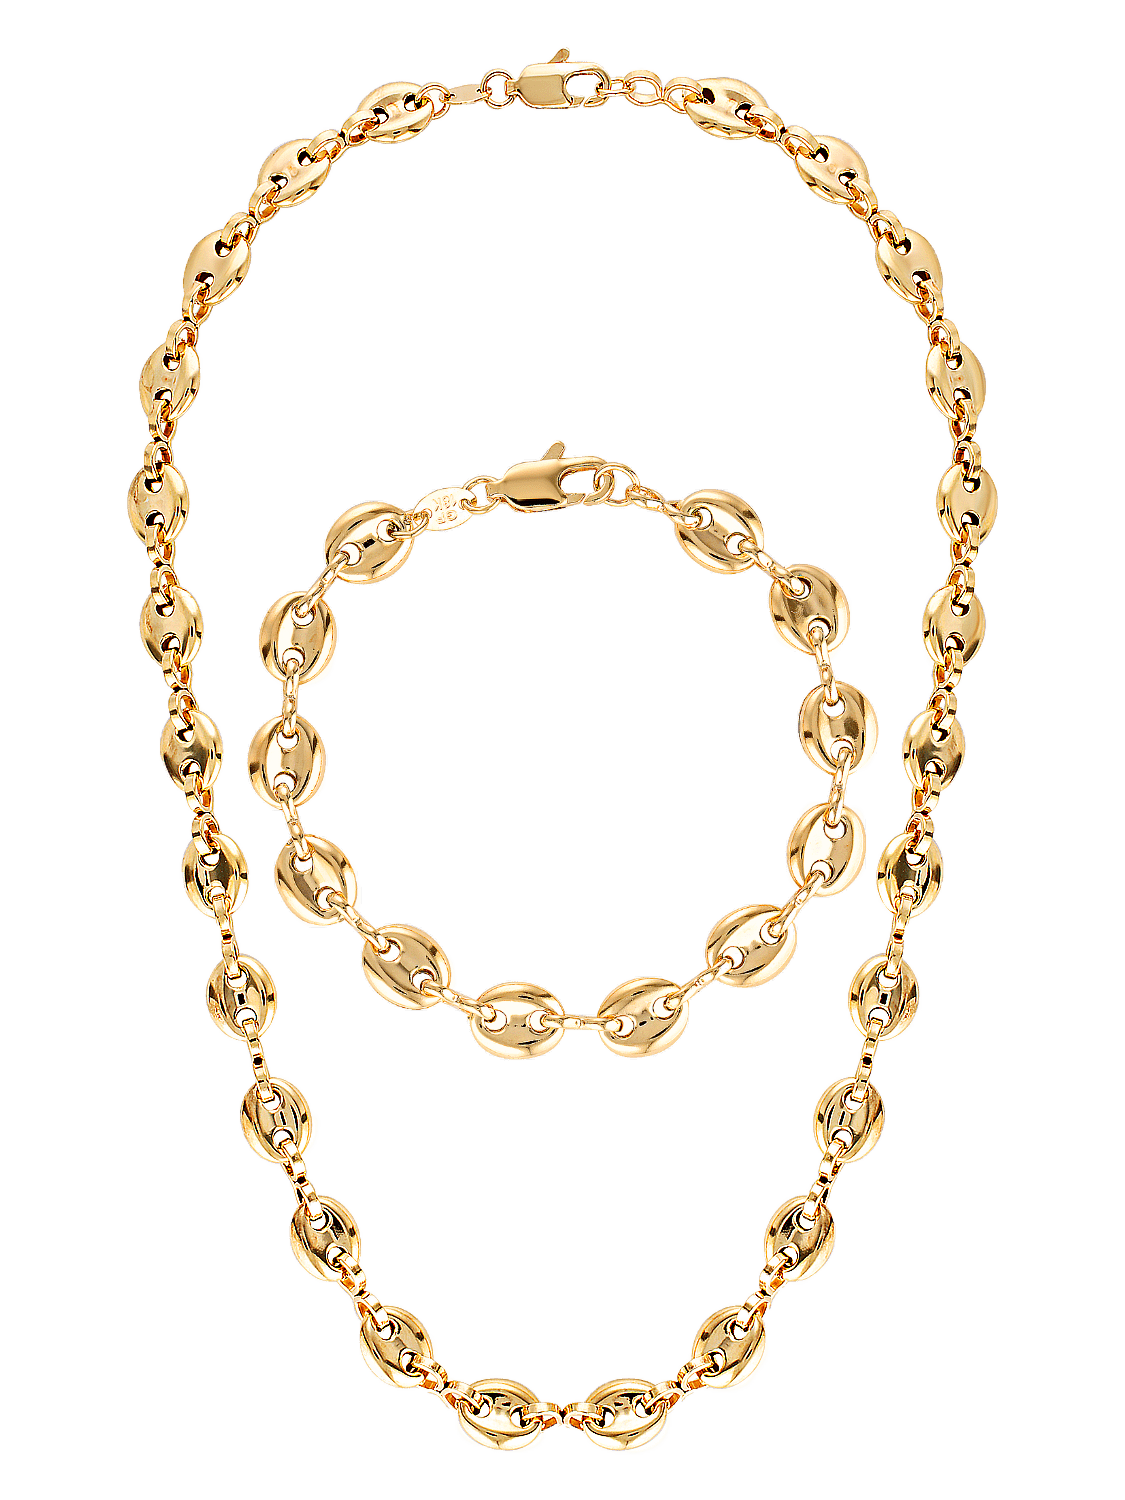 Luxury gold filled necklace Gucci link